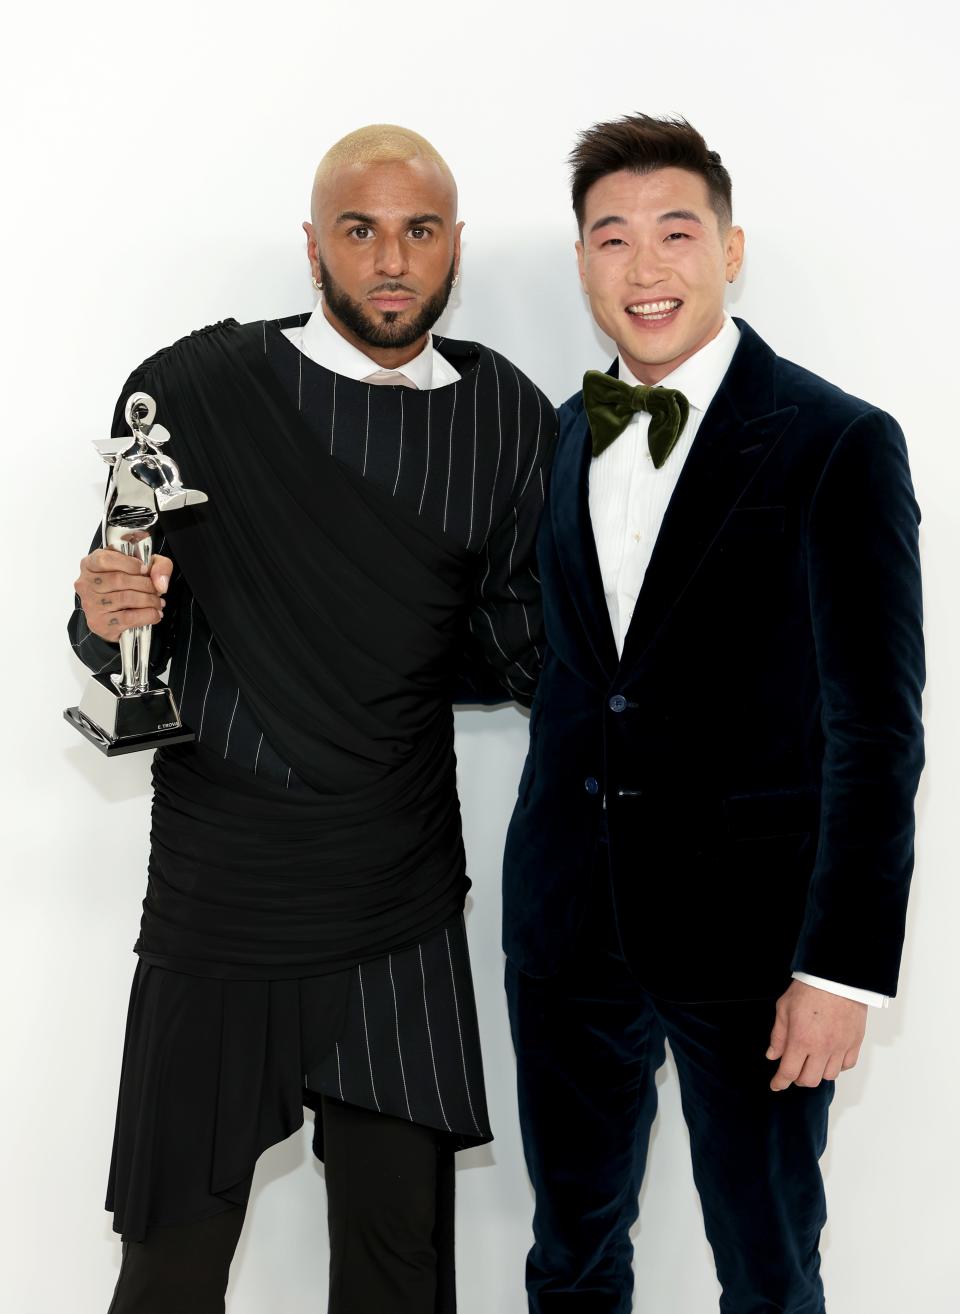 Raul Lopez and Joel Kim Booster attend the CFDA Fashion Awards at Casa Cipriani on Nov. 7, 2022, in New York City.